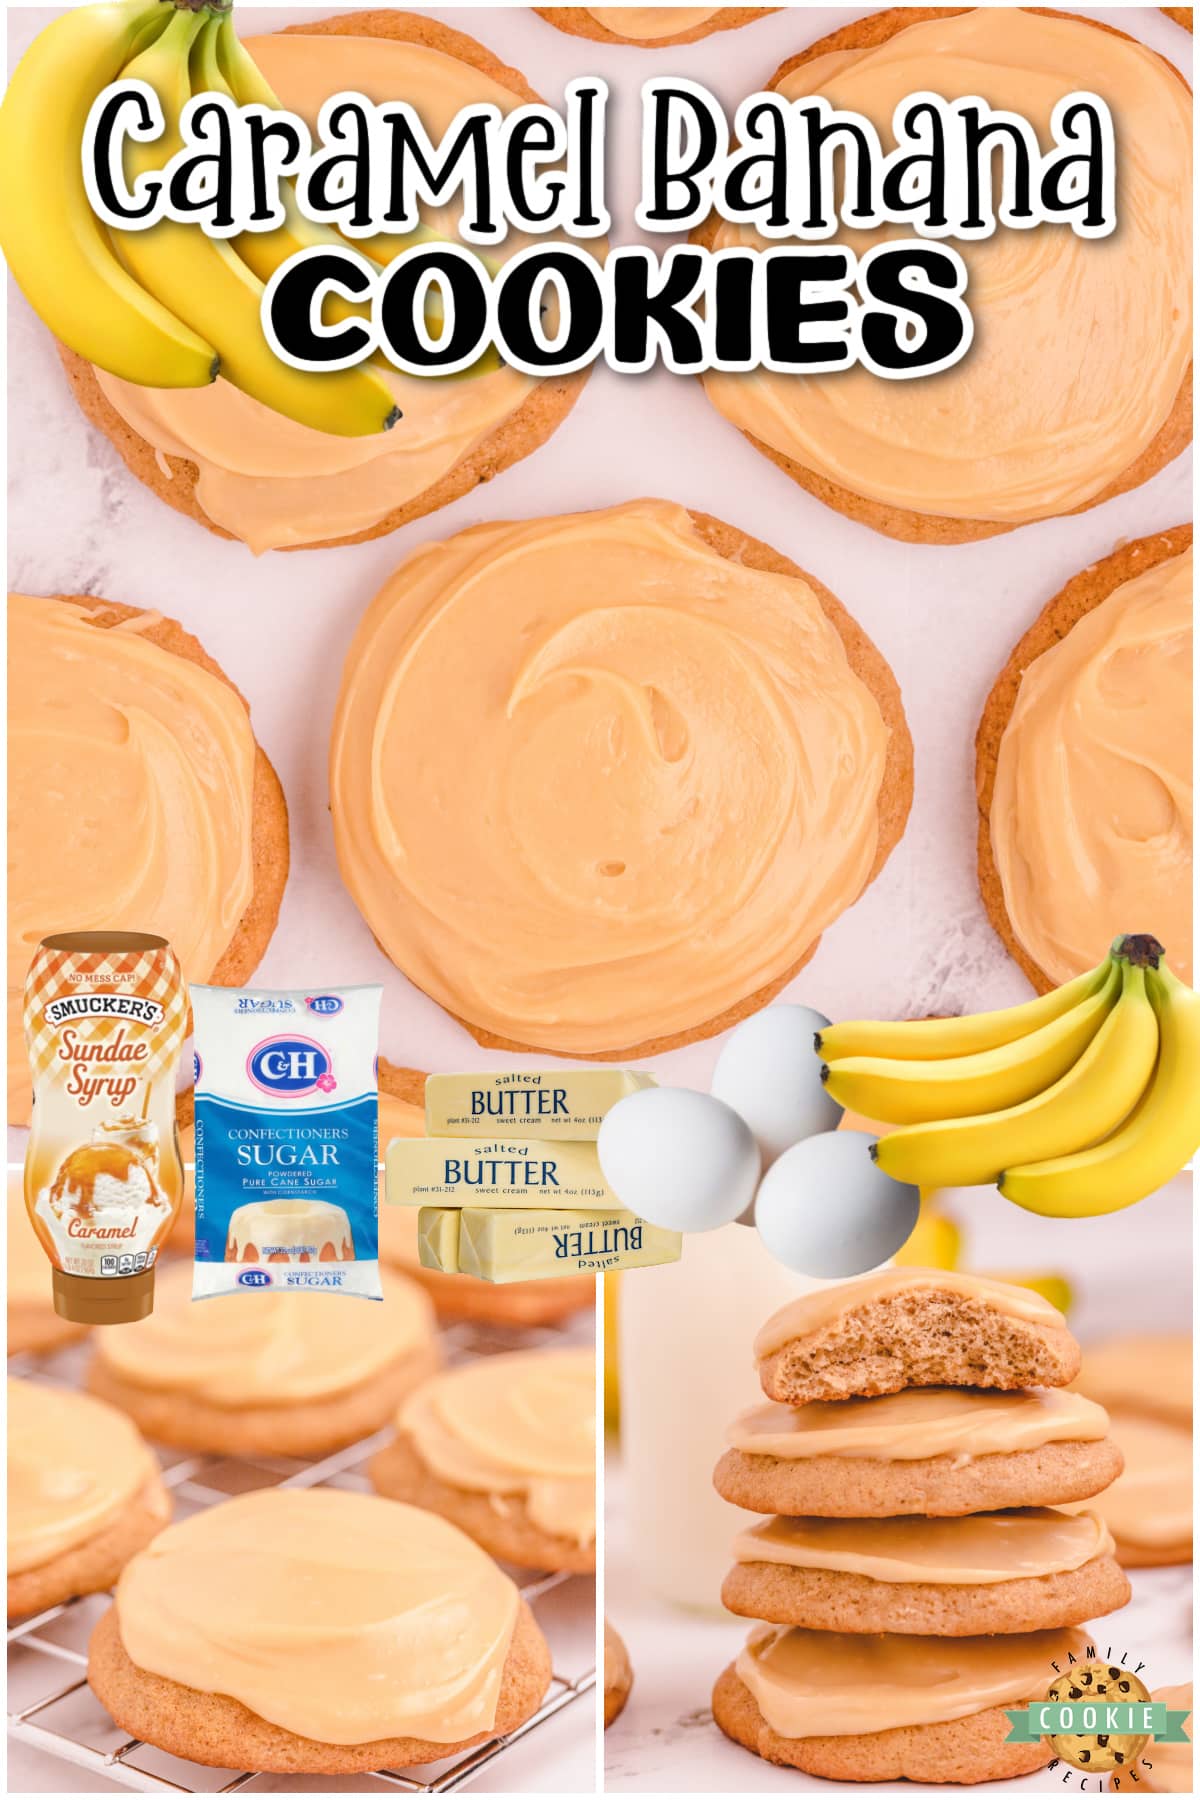 Caramel Banana cookies made with ripe bananas & cinnamon spice, then topped with a warm caramel icing! Banana + Caramel is a fantastic combination in these soft, pillowy cookies!